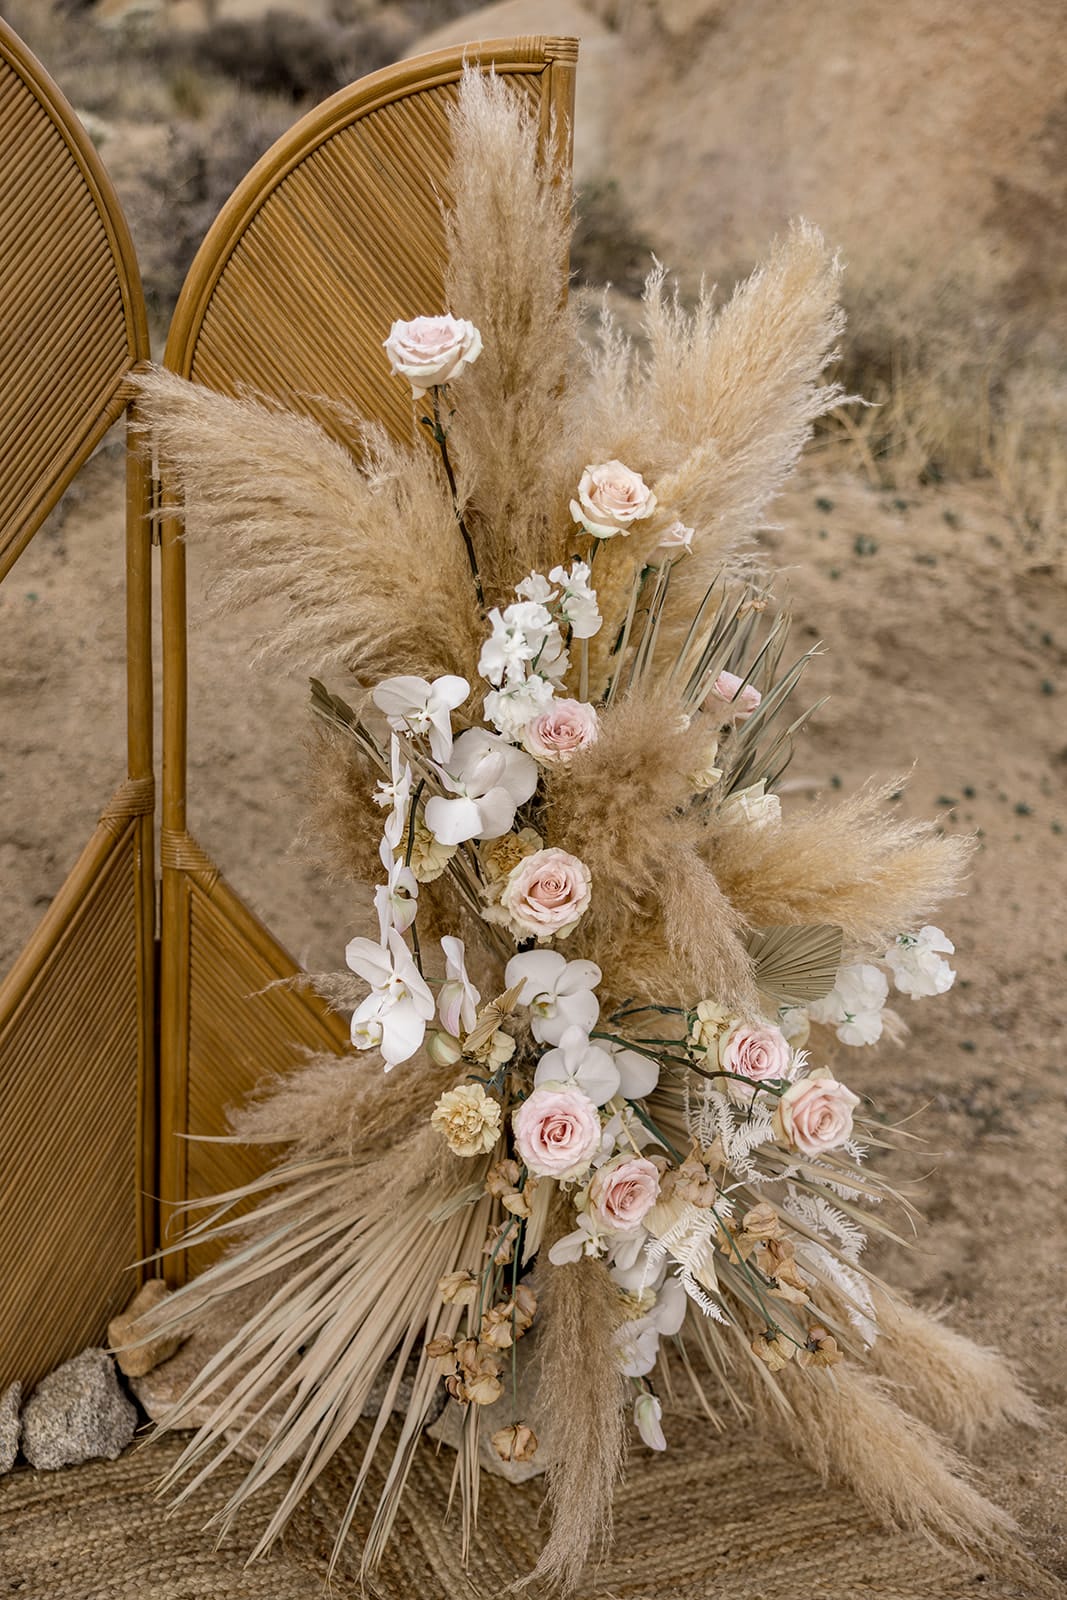 Pampas grass and pink and white colored roses adorn a wedding ceremony arch